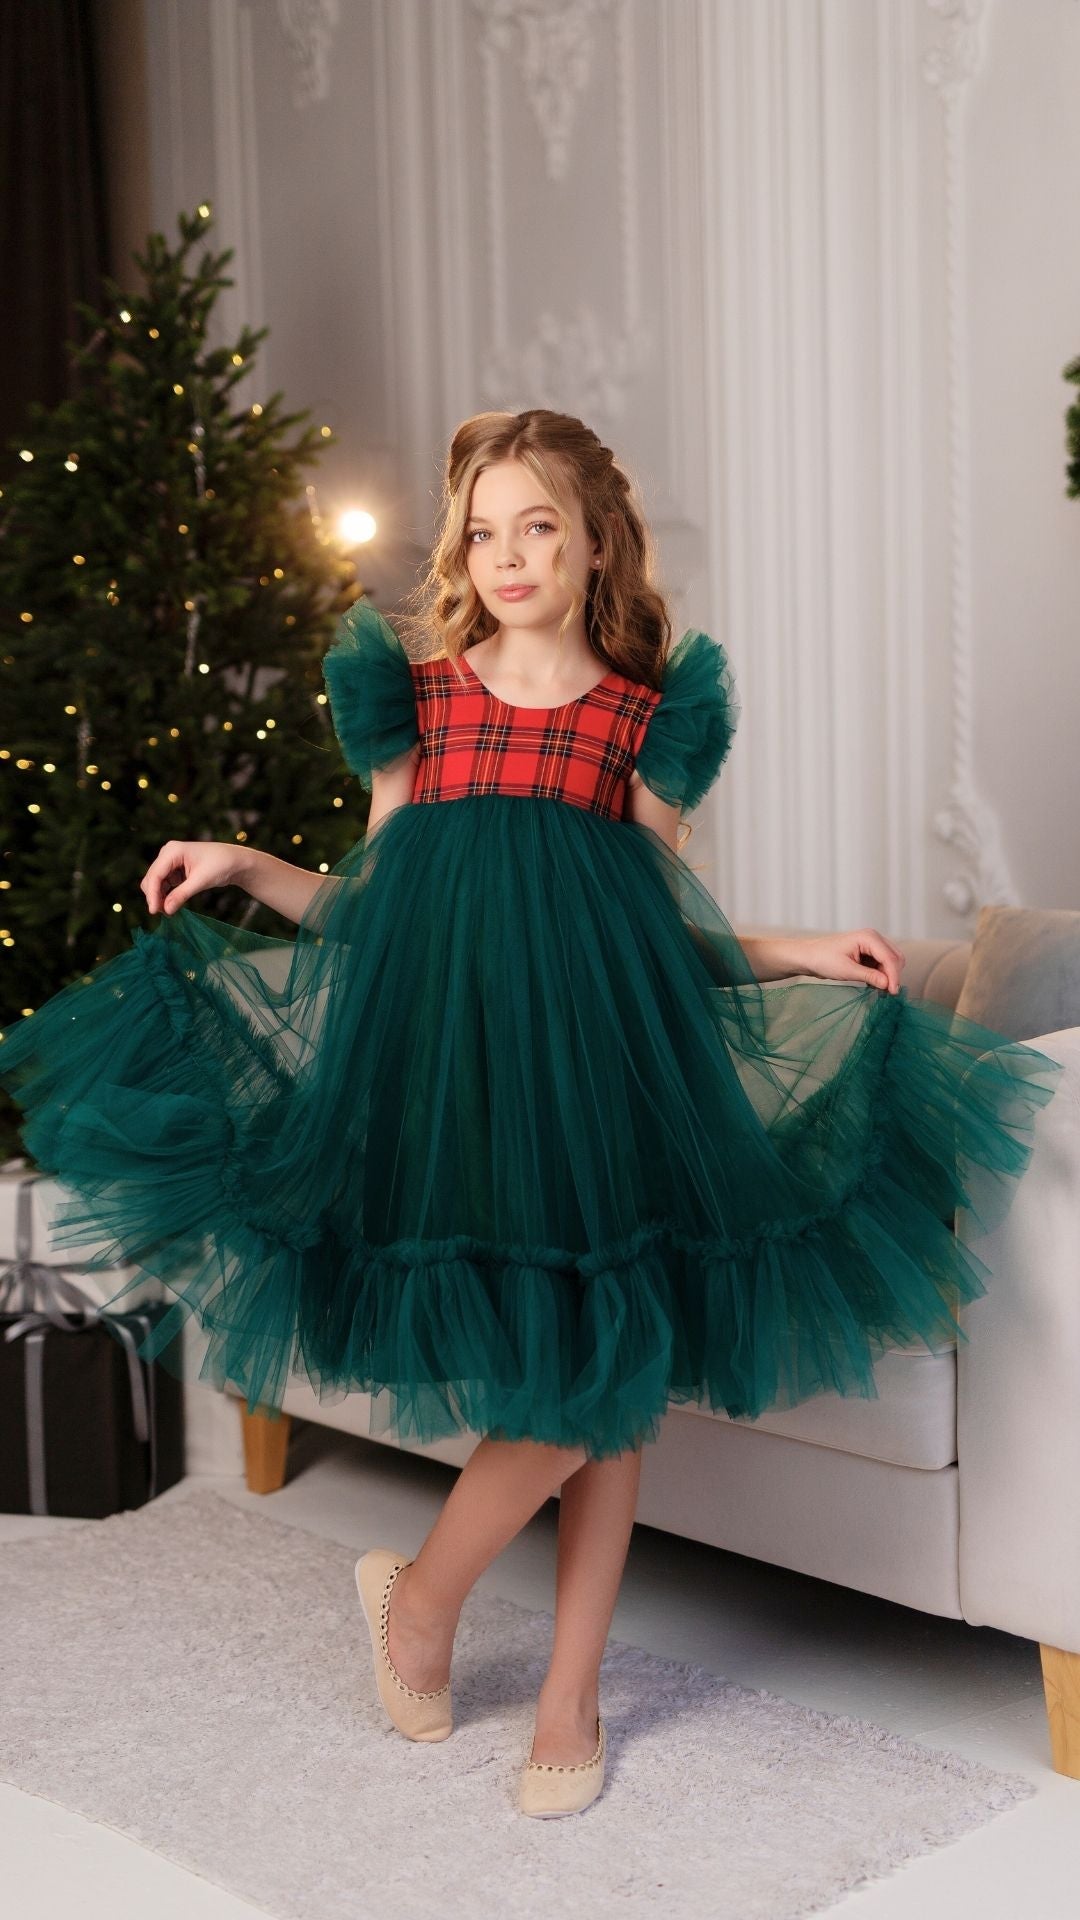 a little girl in a green dress standing in front of a christmas tree